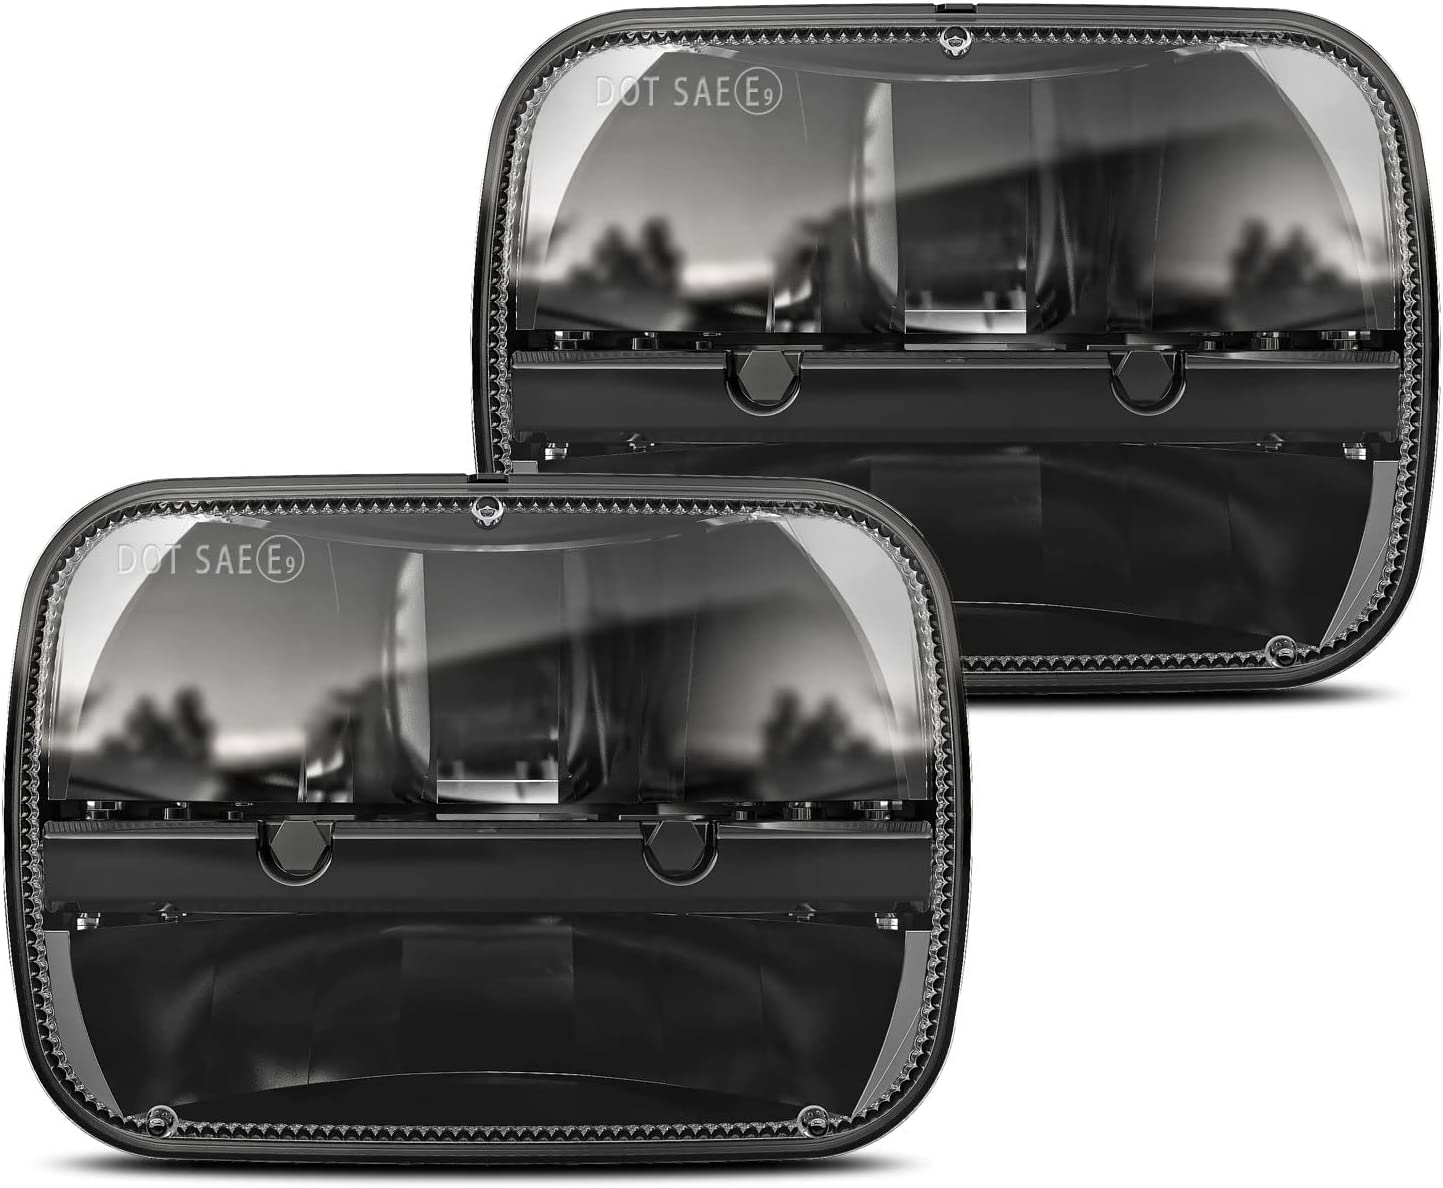 1 Pair 105W 5x7" / 6x7" Rectangular Headlights Compatible with 1997-2010 Jeep Wrangler YJ Cherokee XJ Kenworth T300 Replacement H6054 H6054LL 69822 6052 6053 (2PCS)